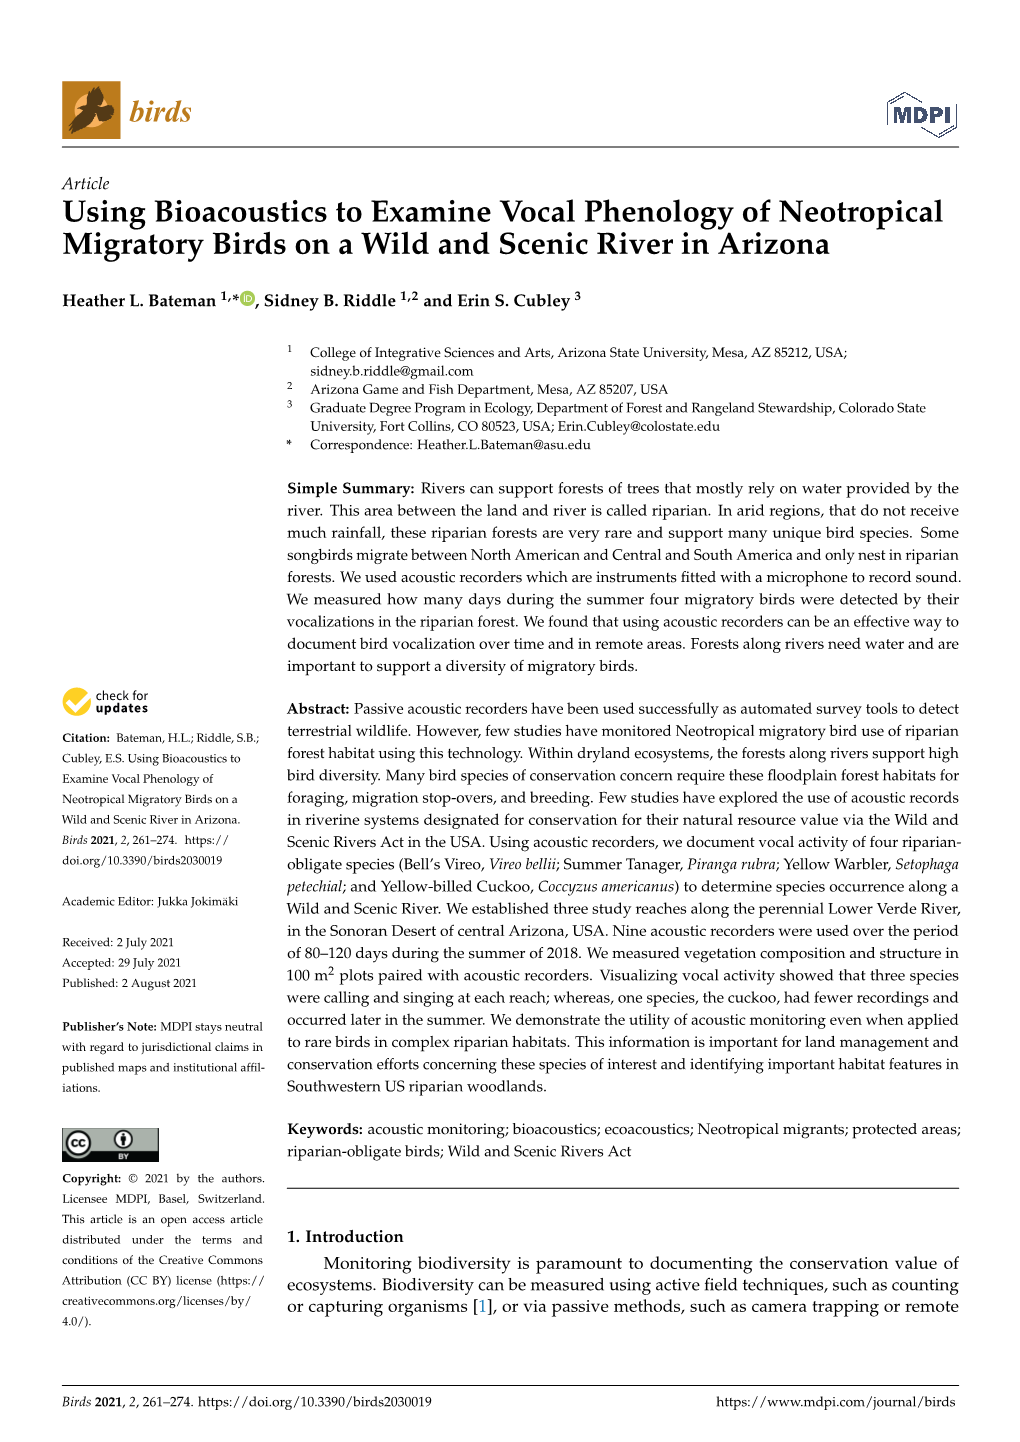 Using Bioacoustics to Examine Vocal Phenology of Neotropical Migratory Birds on a Wild and Scenic River in Arizona